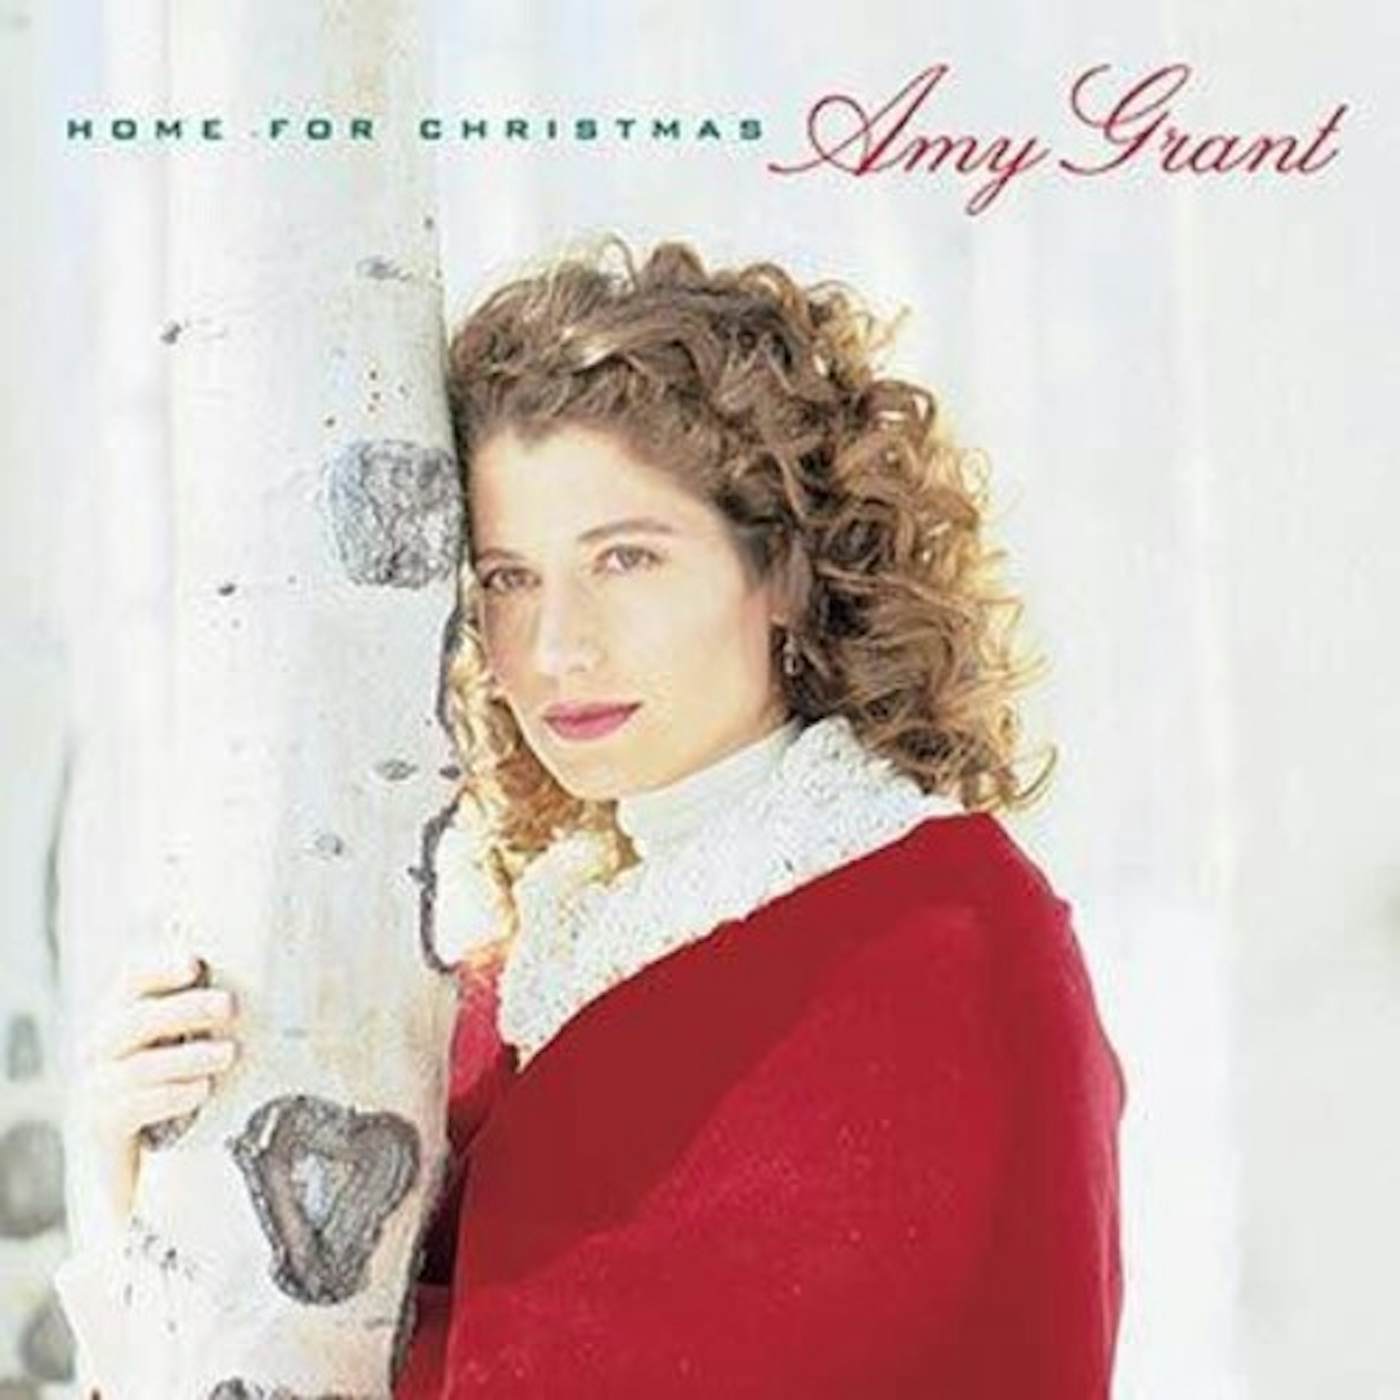 Amy Grant Home For Christmas Vinyl Record